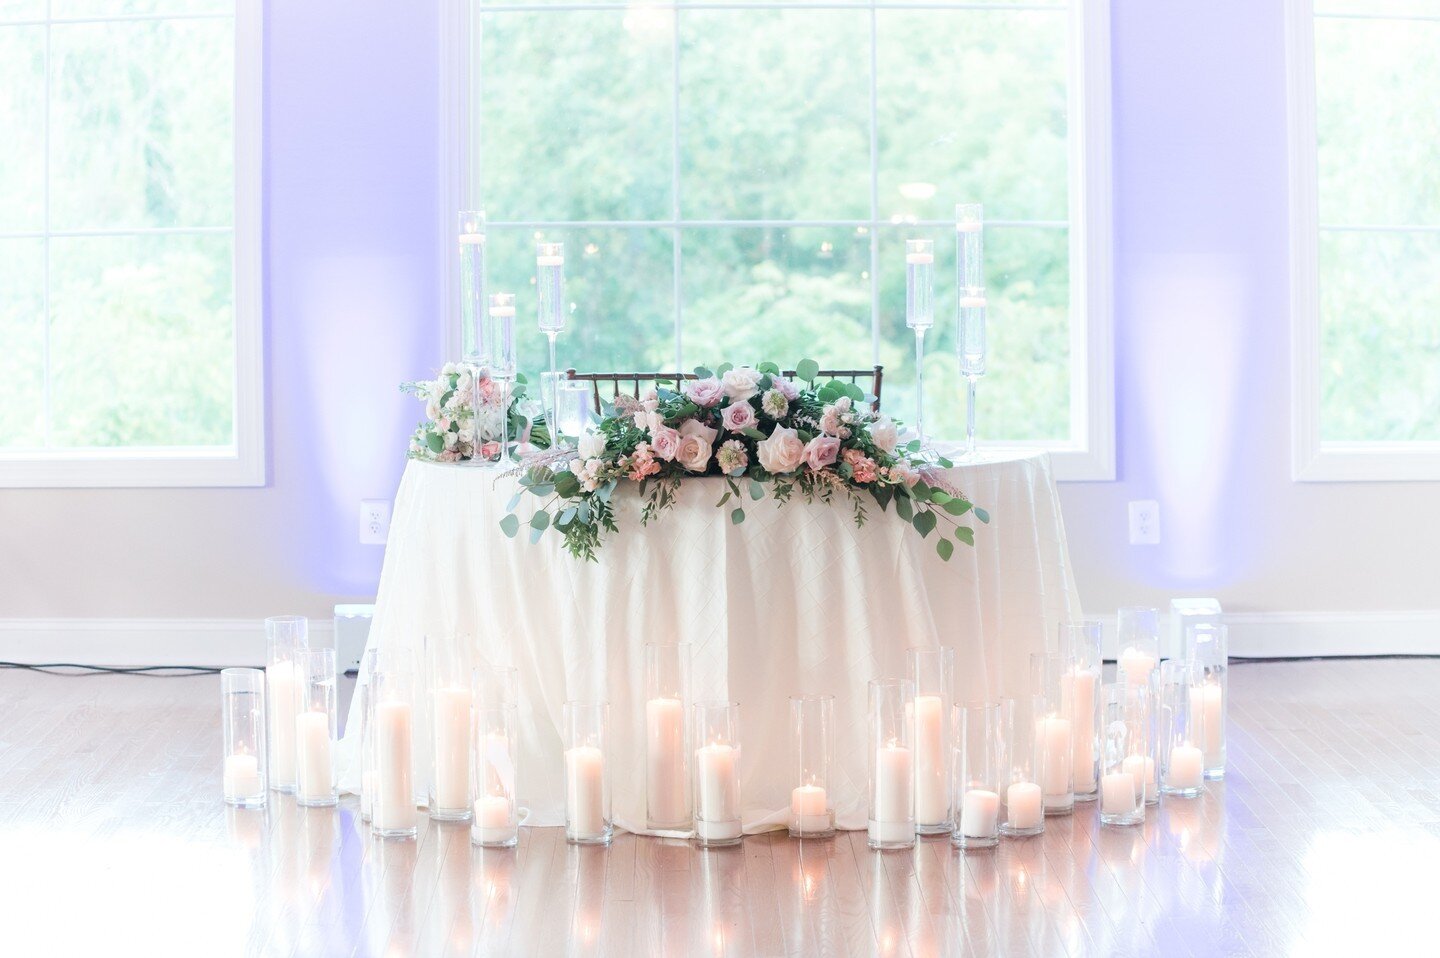 Attention all brides and grooms! 🌸💍⁠
⁠
Choosing the right wedding florist can make all the difference in creating the perfect ambiance for your special day. But before you hire a florist, make sure to avoid these five biggest mistakes:⁠
⁠
1. Not do